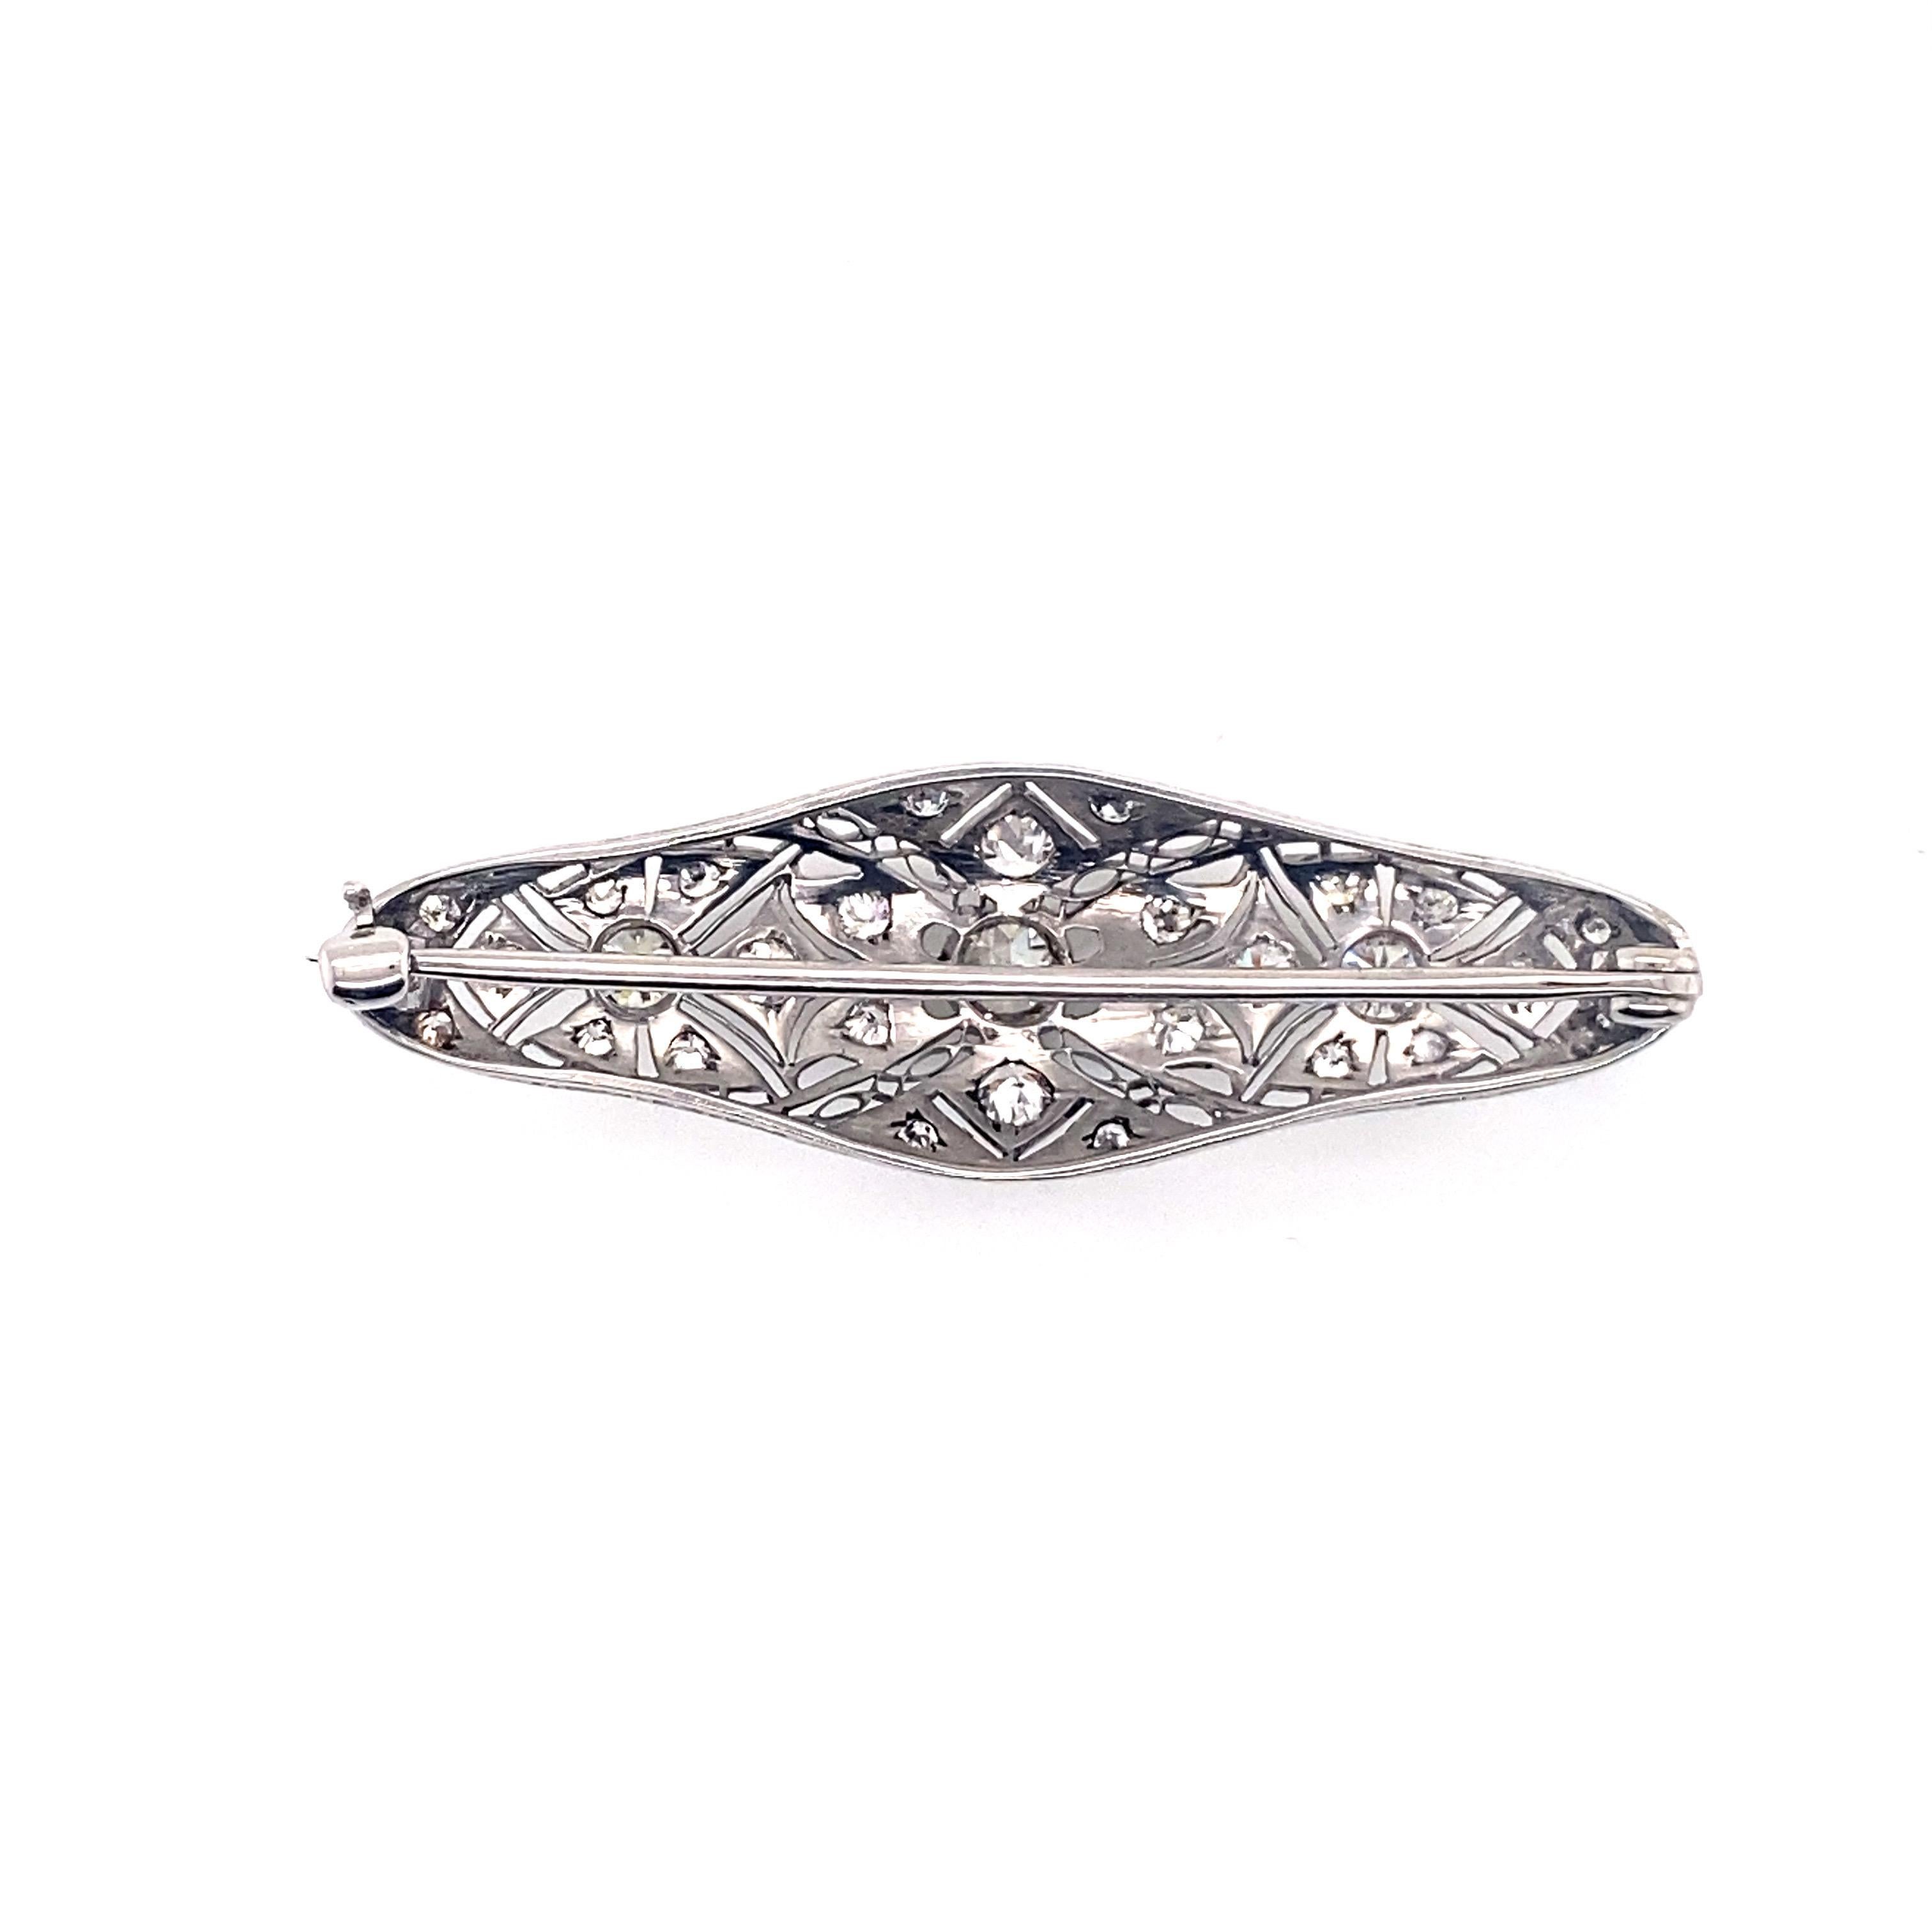 This exquisite brooch is a breathtaking example of the exceptional craftsmanship and artistry that defined the 1930s era. Rendered in lustrous platinum, it showcases an intricate filigree design adorned with dazzling diamonds, creating a true